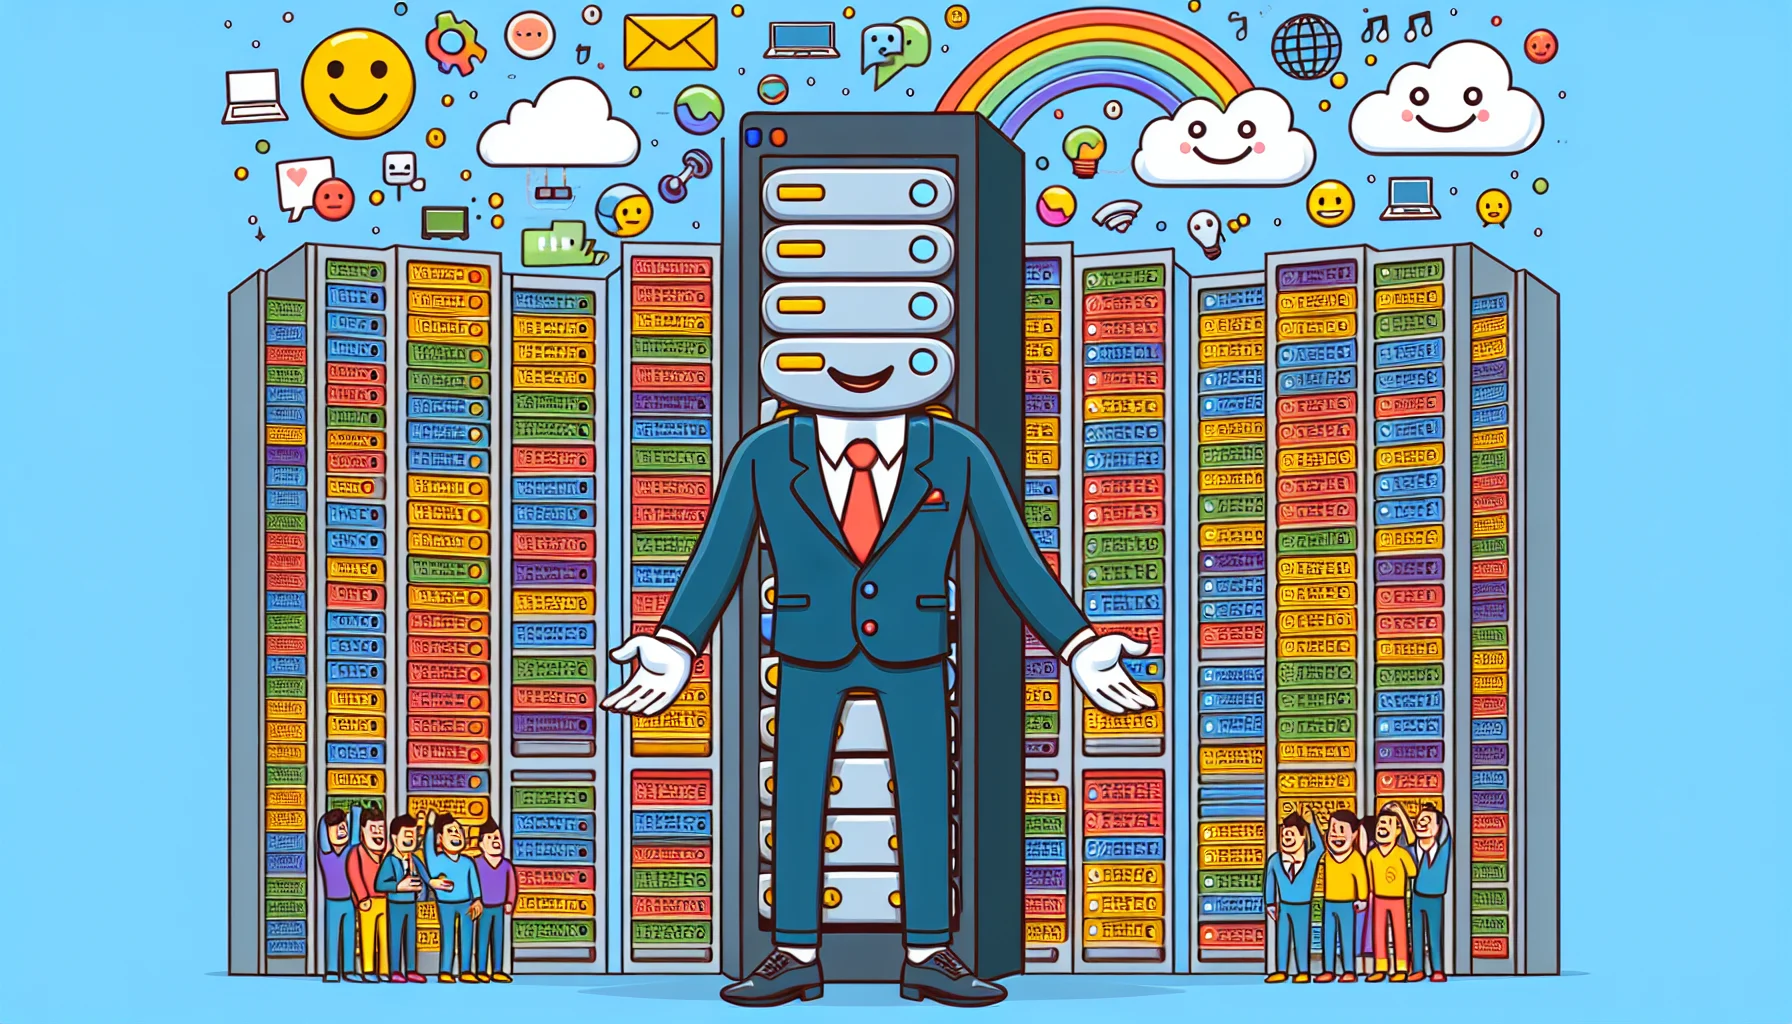 Imagine a humorous and engaging scenario illustrating the concept of web hosting. Visualize a towering server rack dressed in a flexible business suit, engaging in a friendly conversation with an array of colorful, anthropomorphized website icons. The server rack, with a cordial yet robotic smile, offers to carry the website icons' data in its shelving units - metaphorically representing the act of web hosting. To make it more appealing, depict the background filled with lighthearted internet-themed elements like pixelated clouds and binary code rainbows.